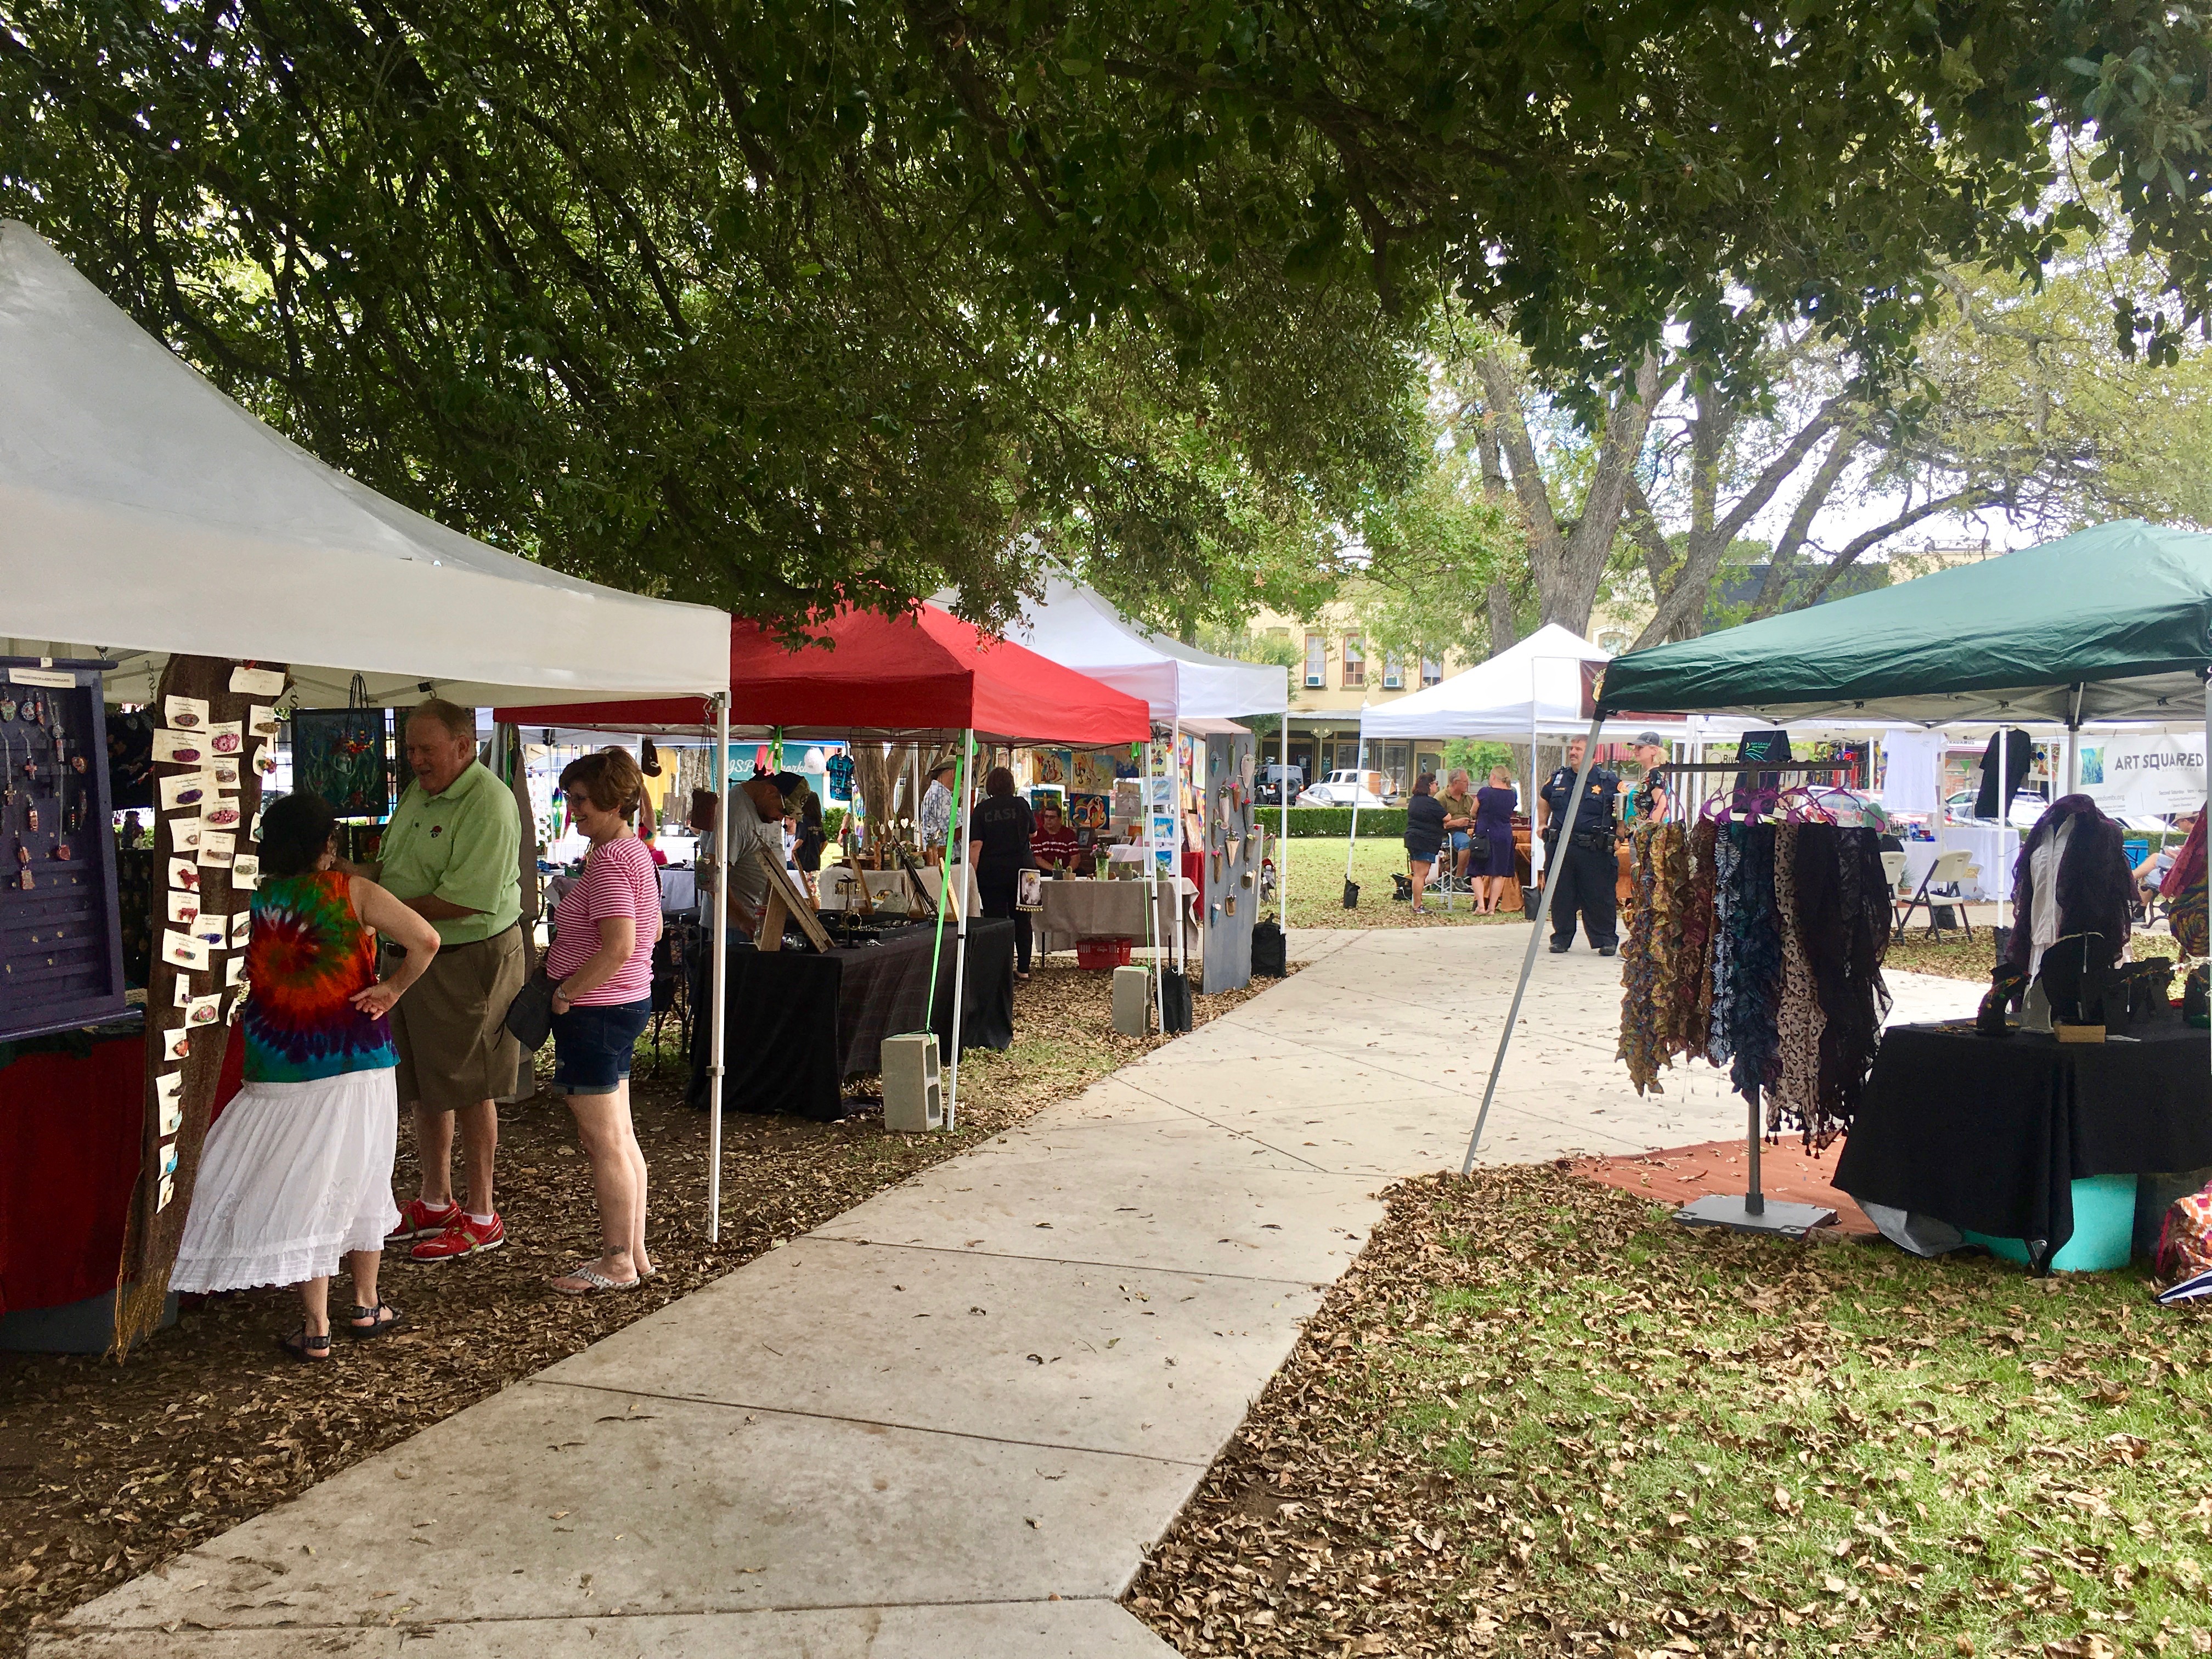 Things to do in San Marcos TX Art Squared Art Market